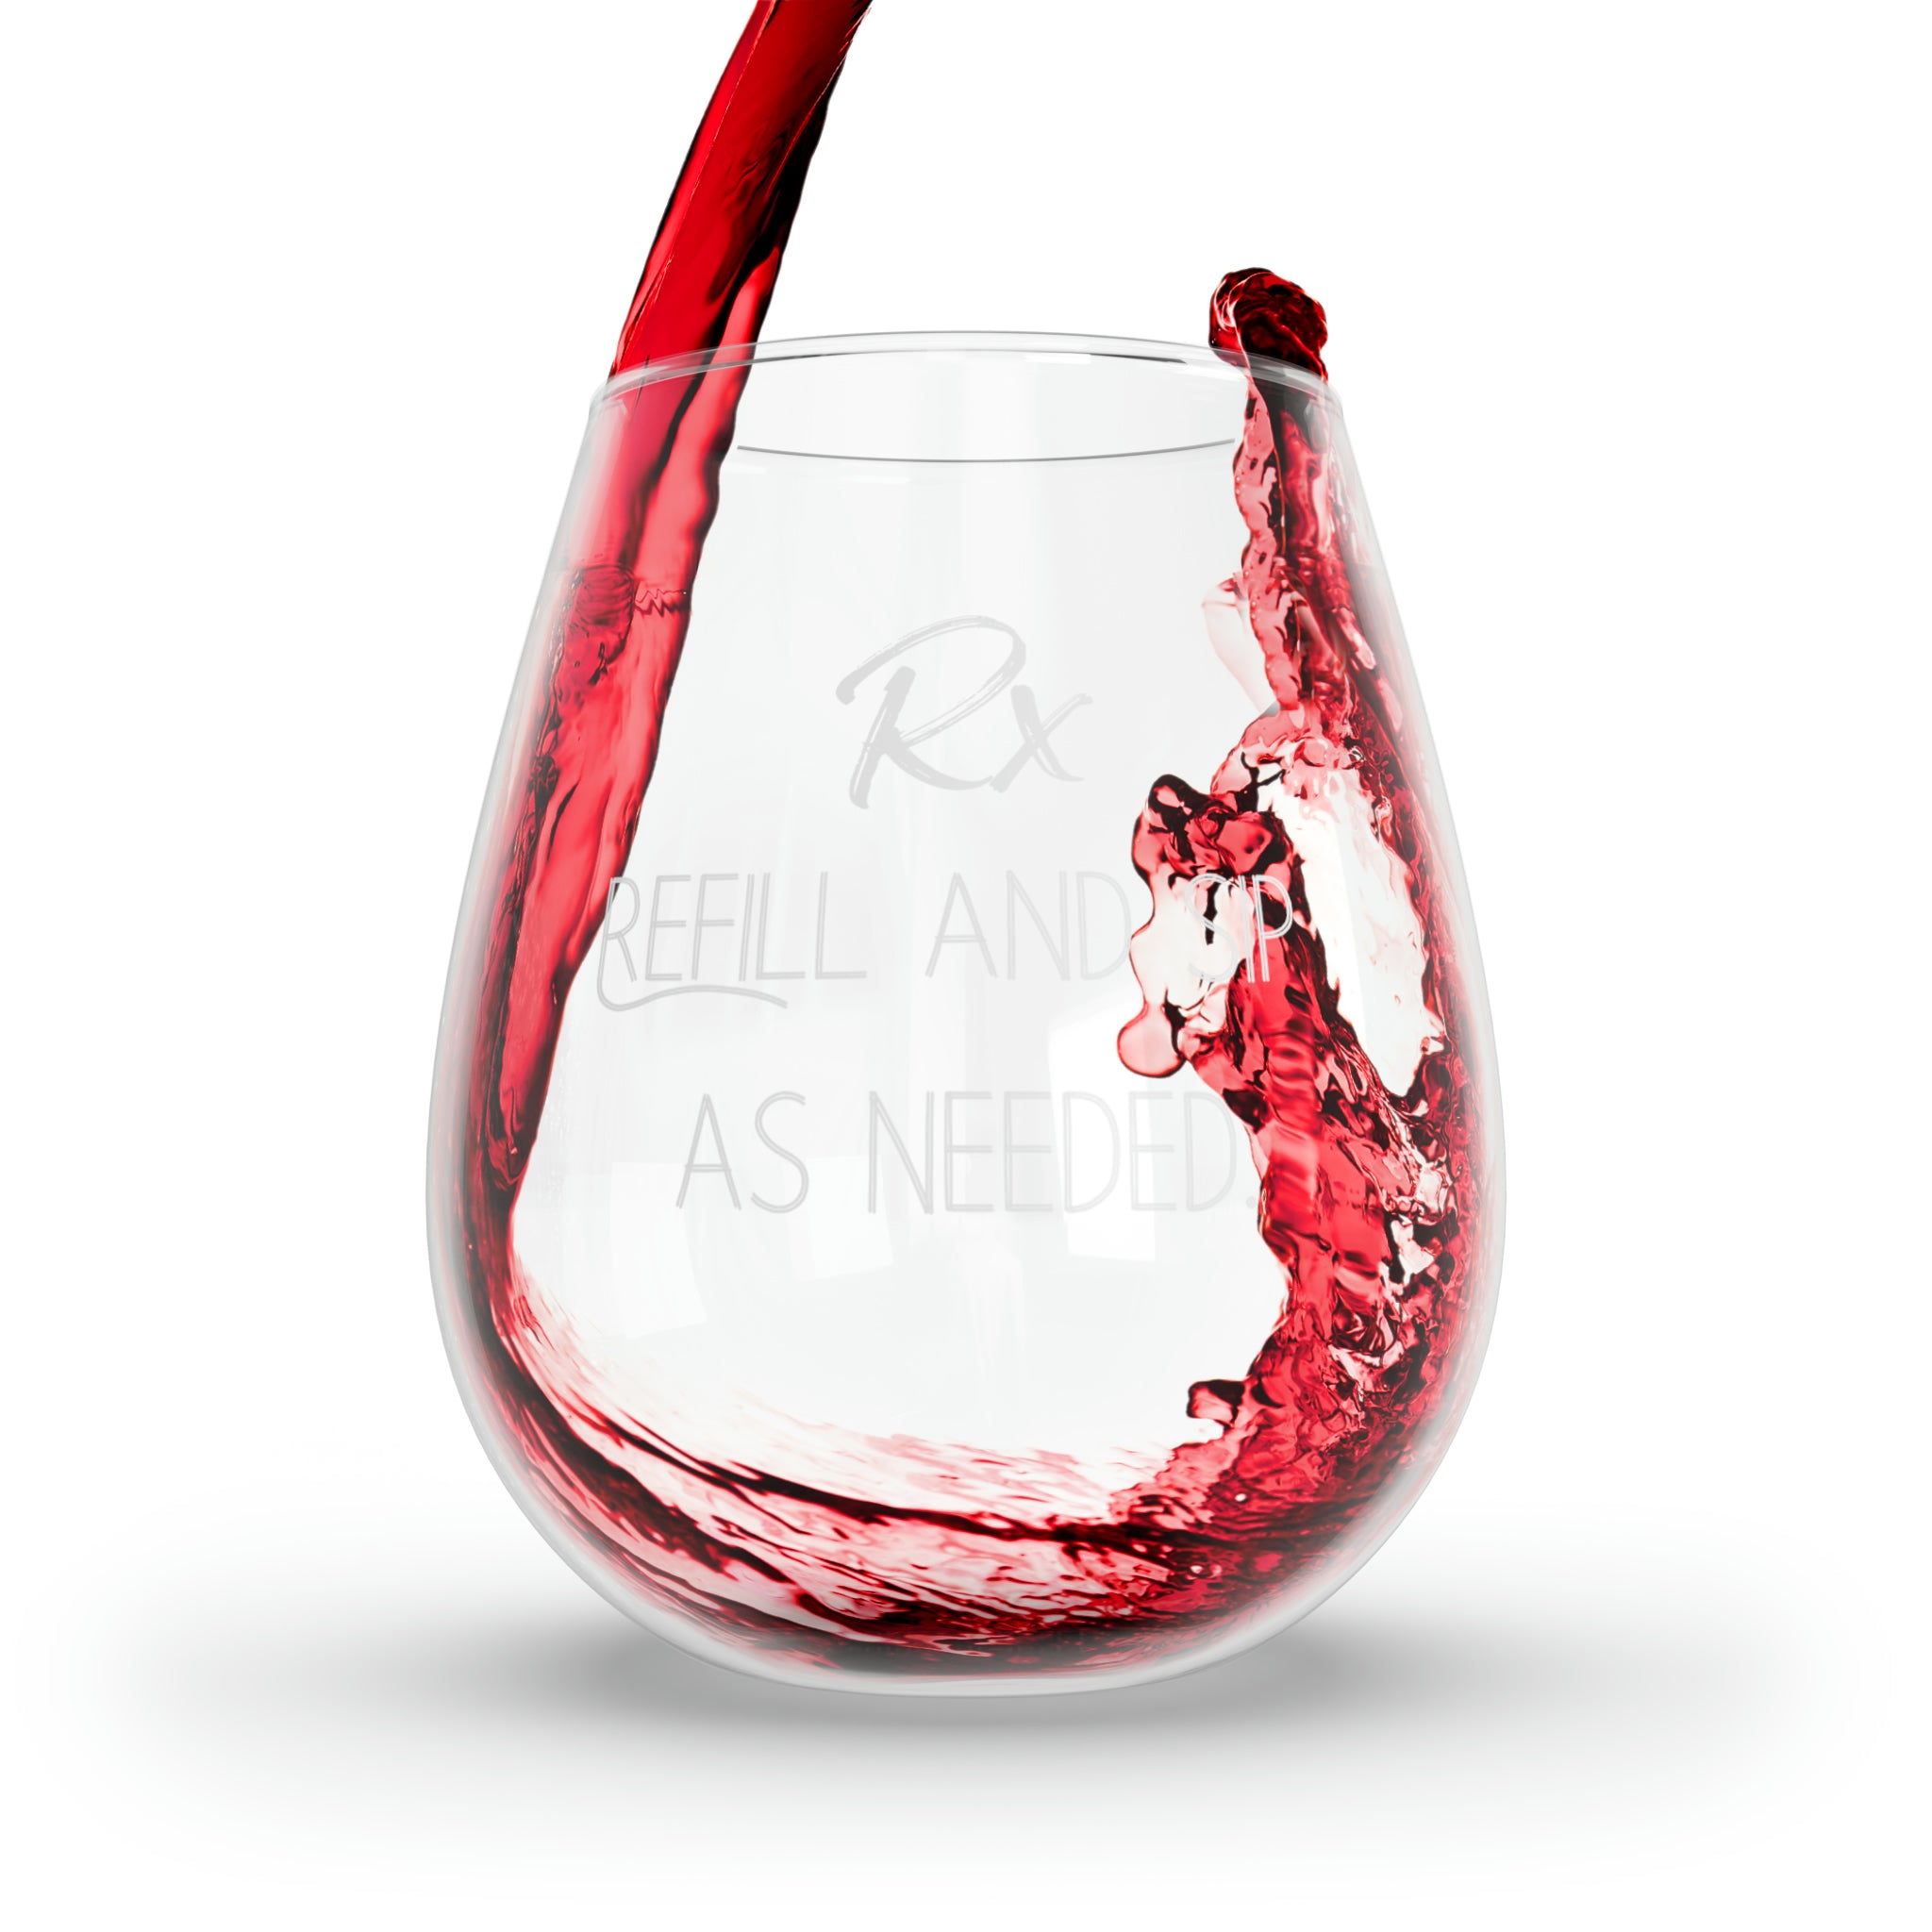 Stemless Wine Glass, 11.75oz - Refill and Sip